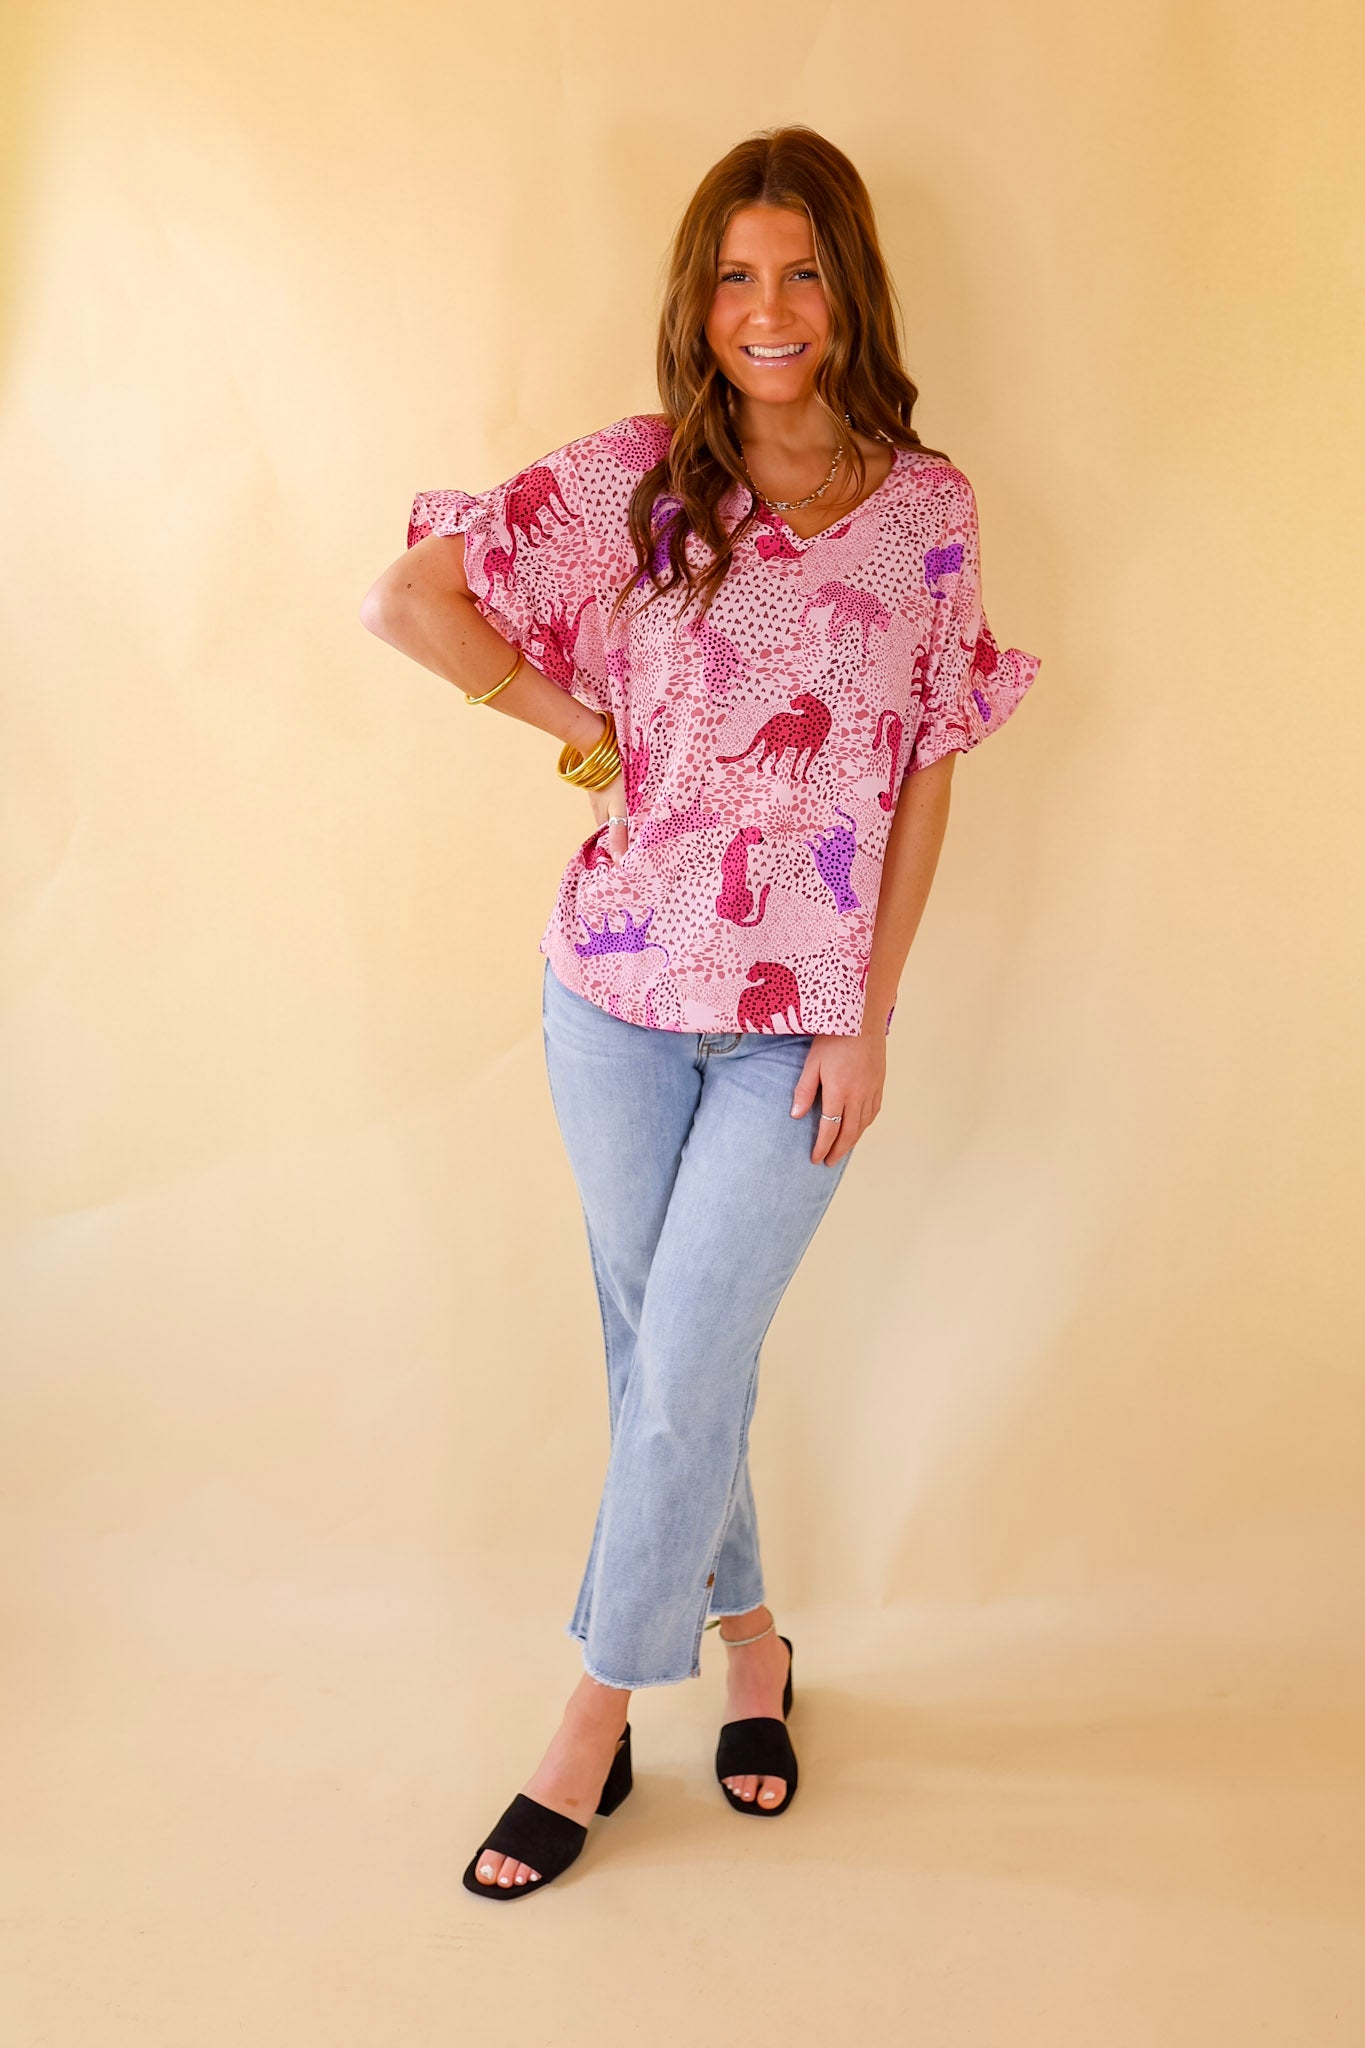 Best Version Cheetah Print V Neck Top with Ruffle Short Sleeves in Pink Mix - Giddy Up Glamour Boutique